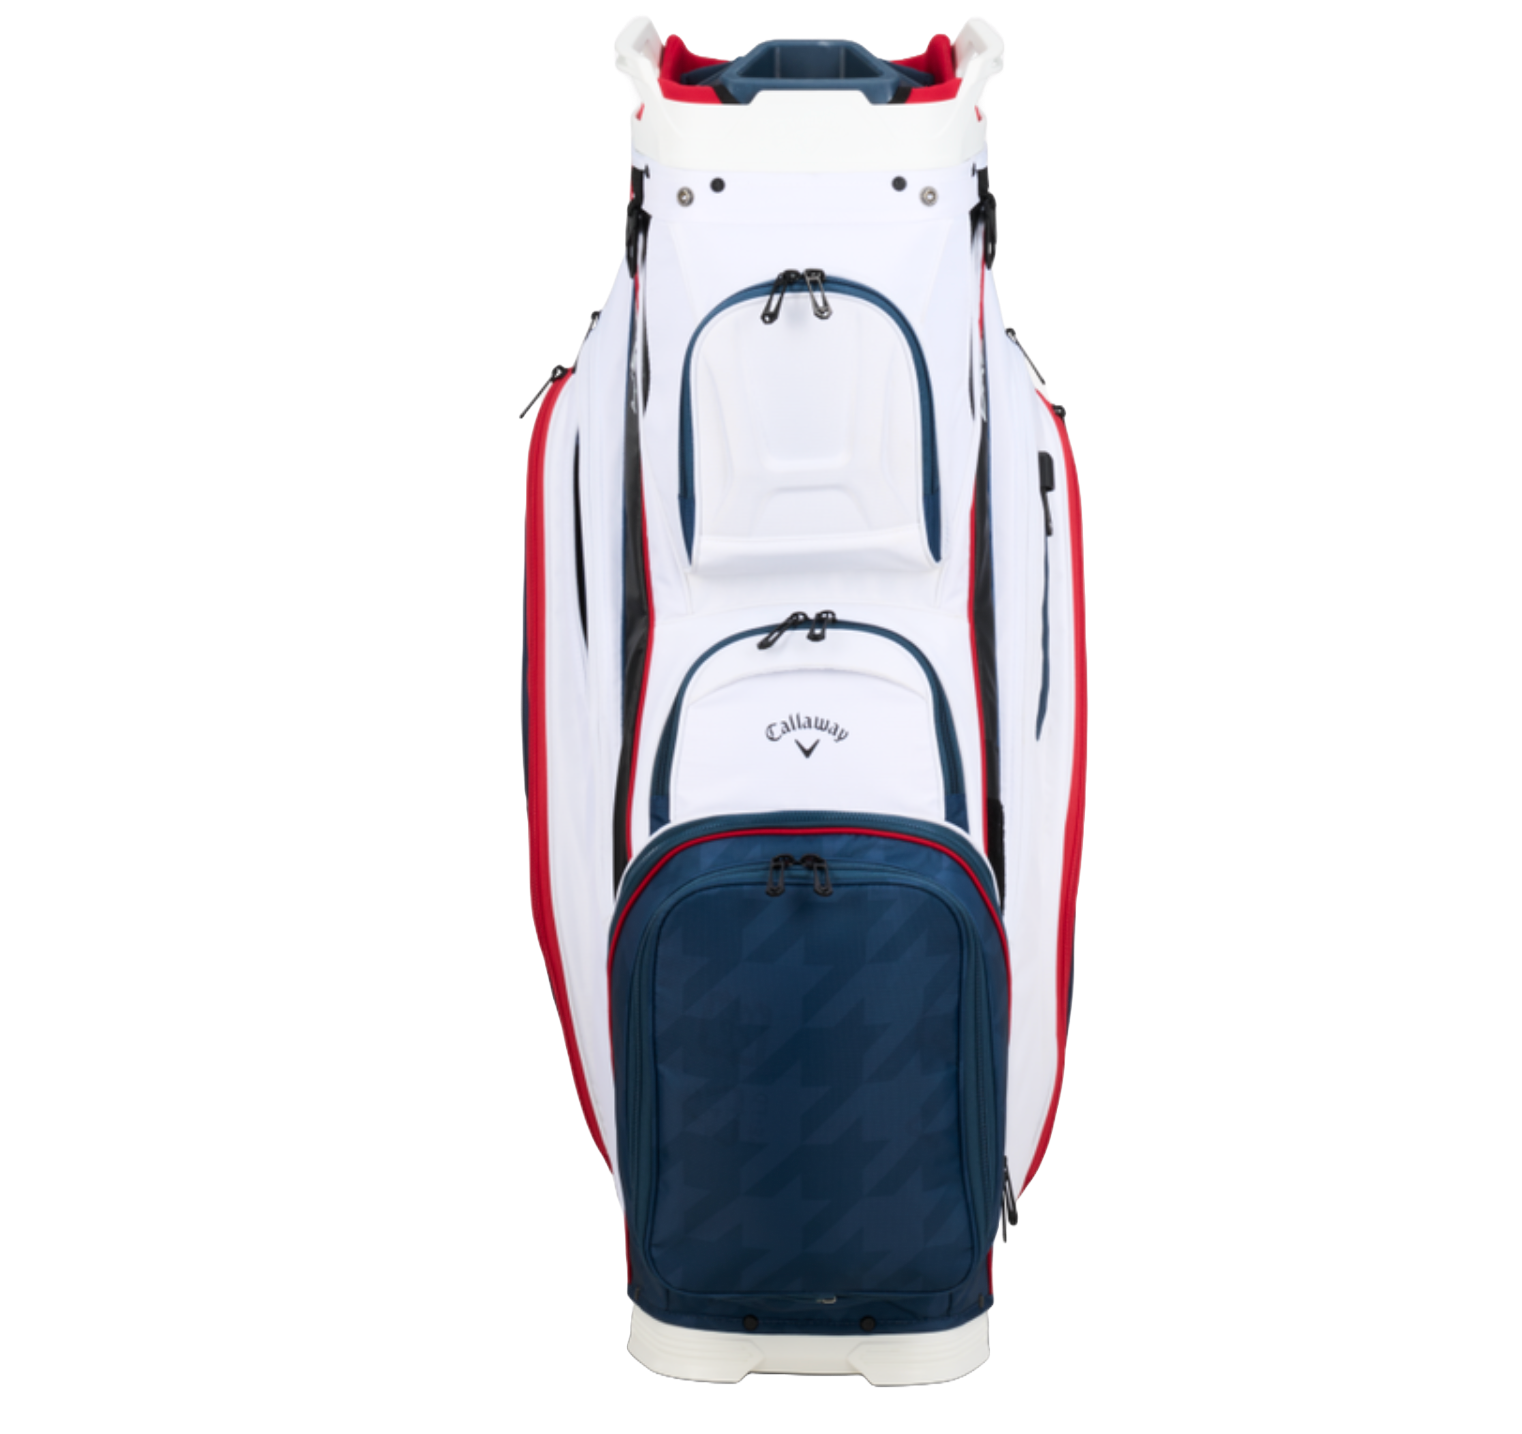 Callaway | 5124093 | Org 14 | Cartbag  | White/Navy Hounds/Red